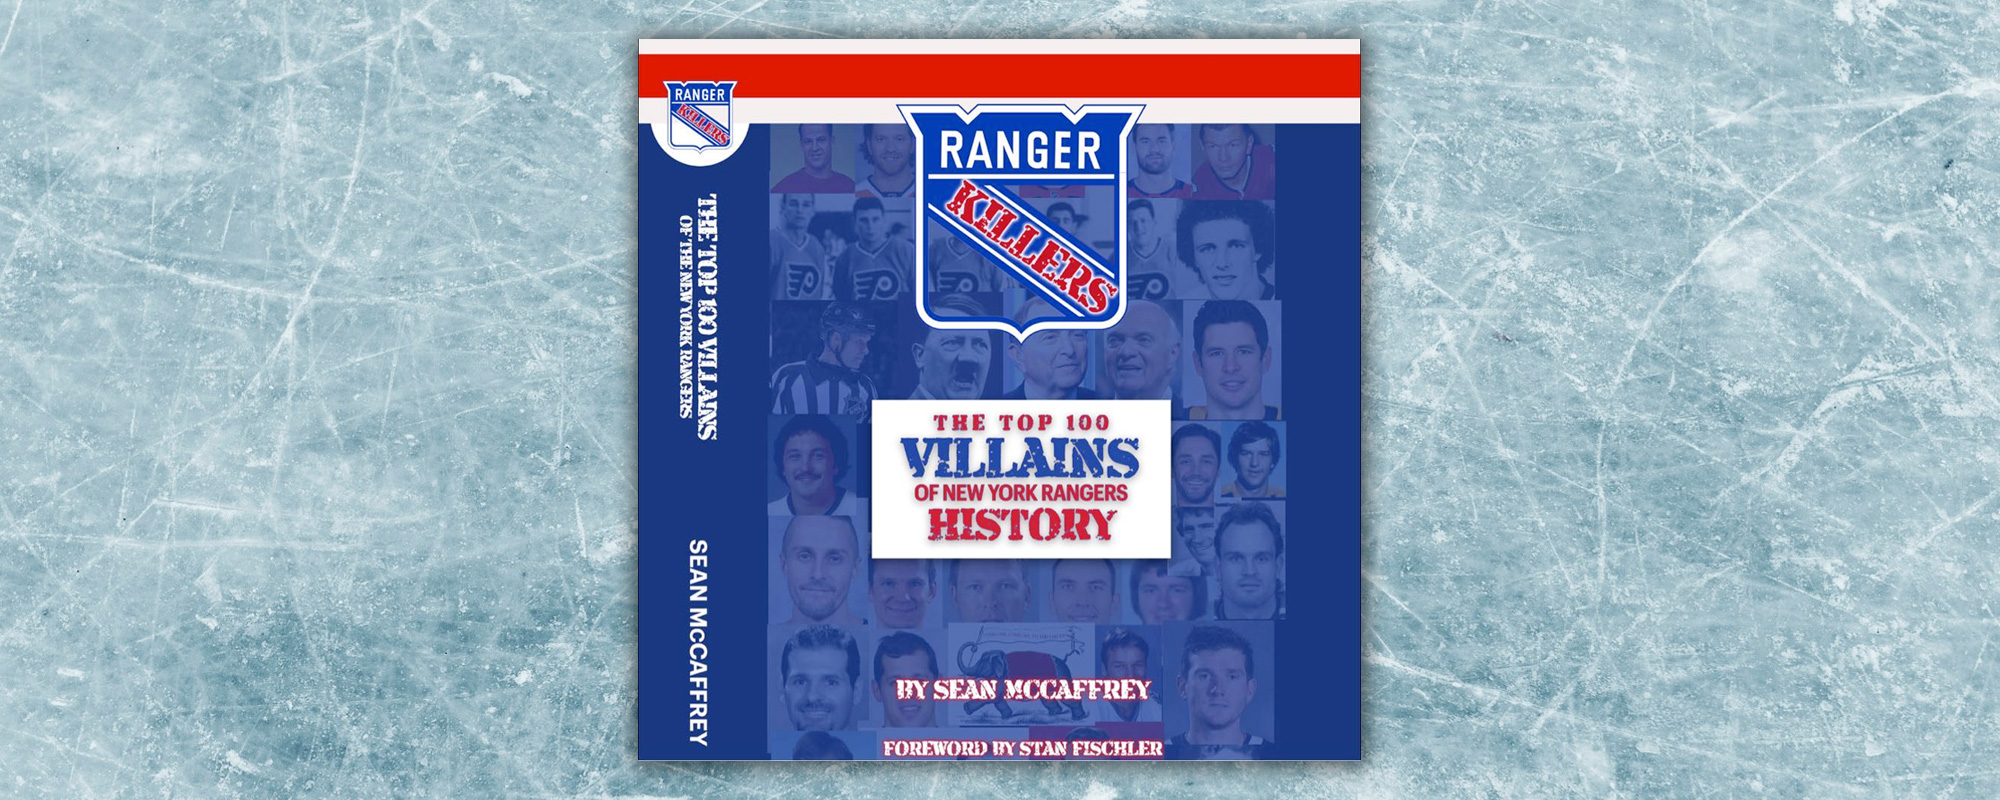 Book Review: The Top 100 Villains of New York Rangers History